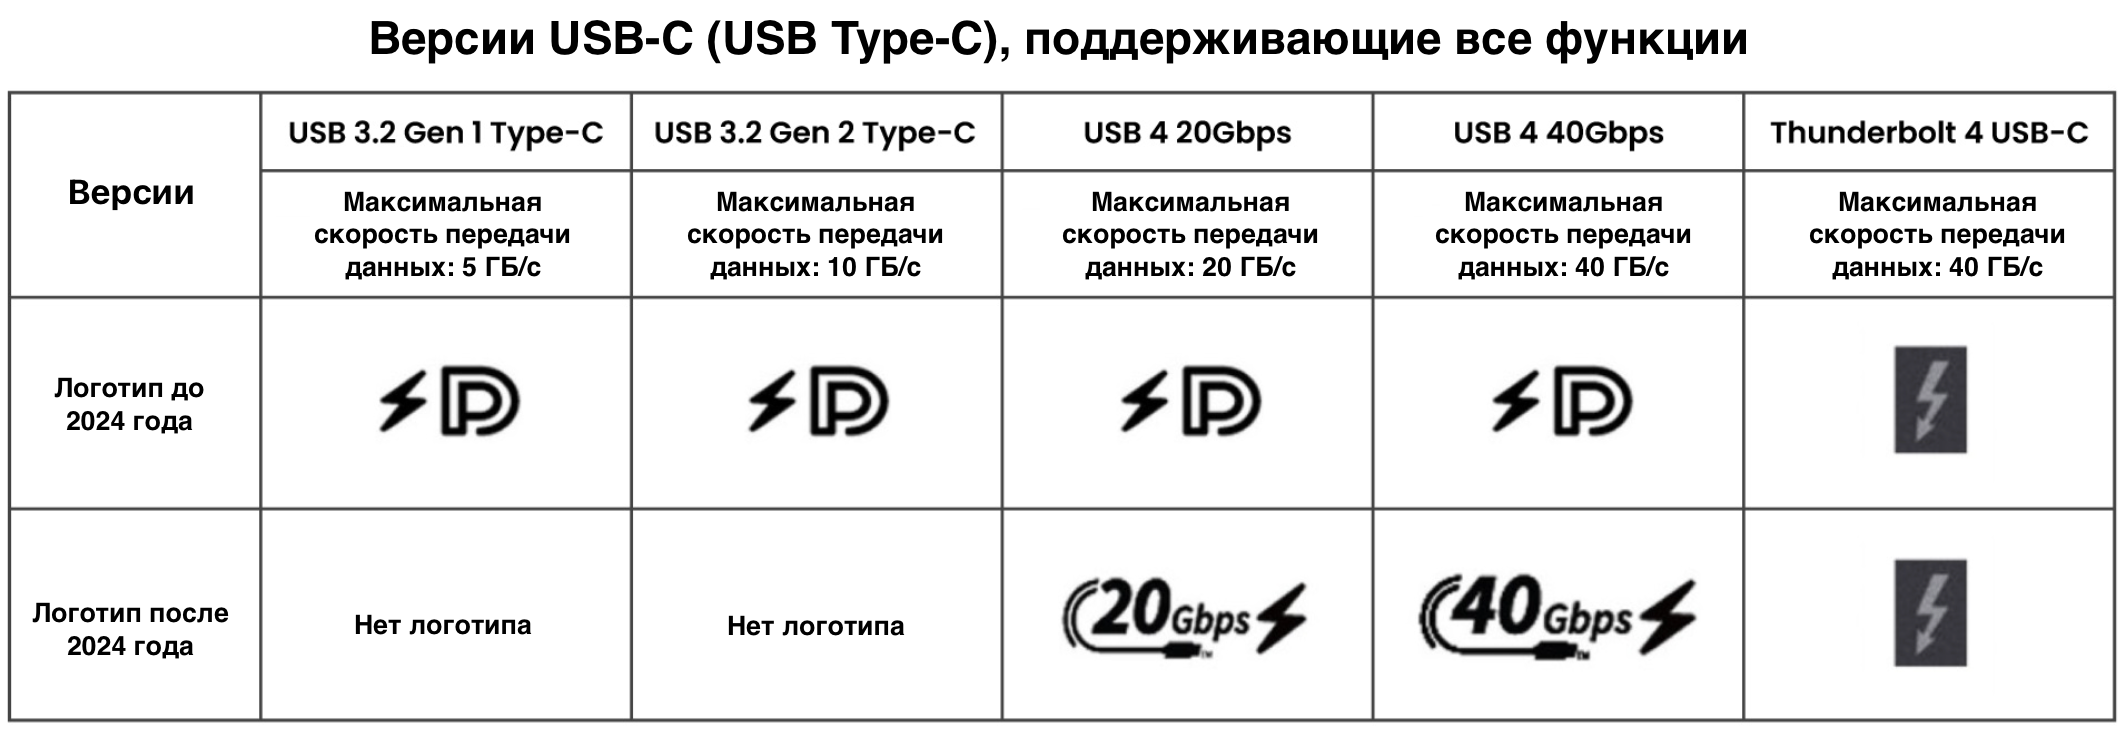 Distinguishing USB-C (USB Type-C) versions from the logo to find the full-featured USB-C